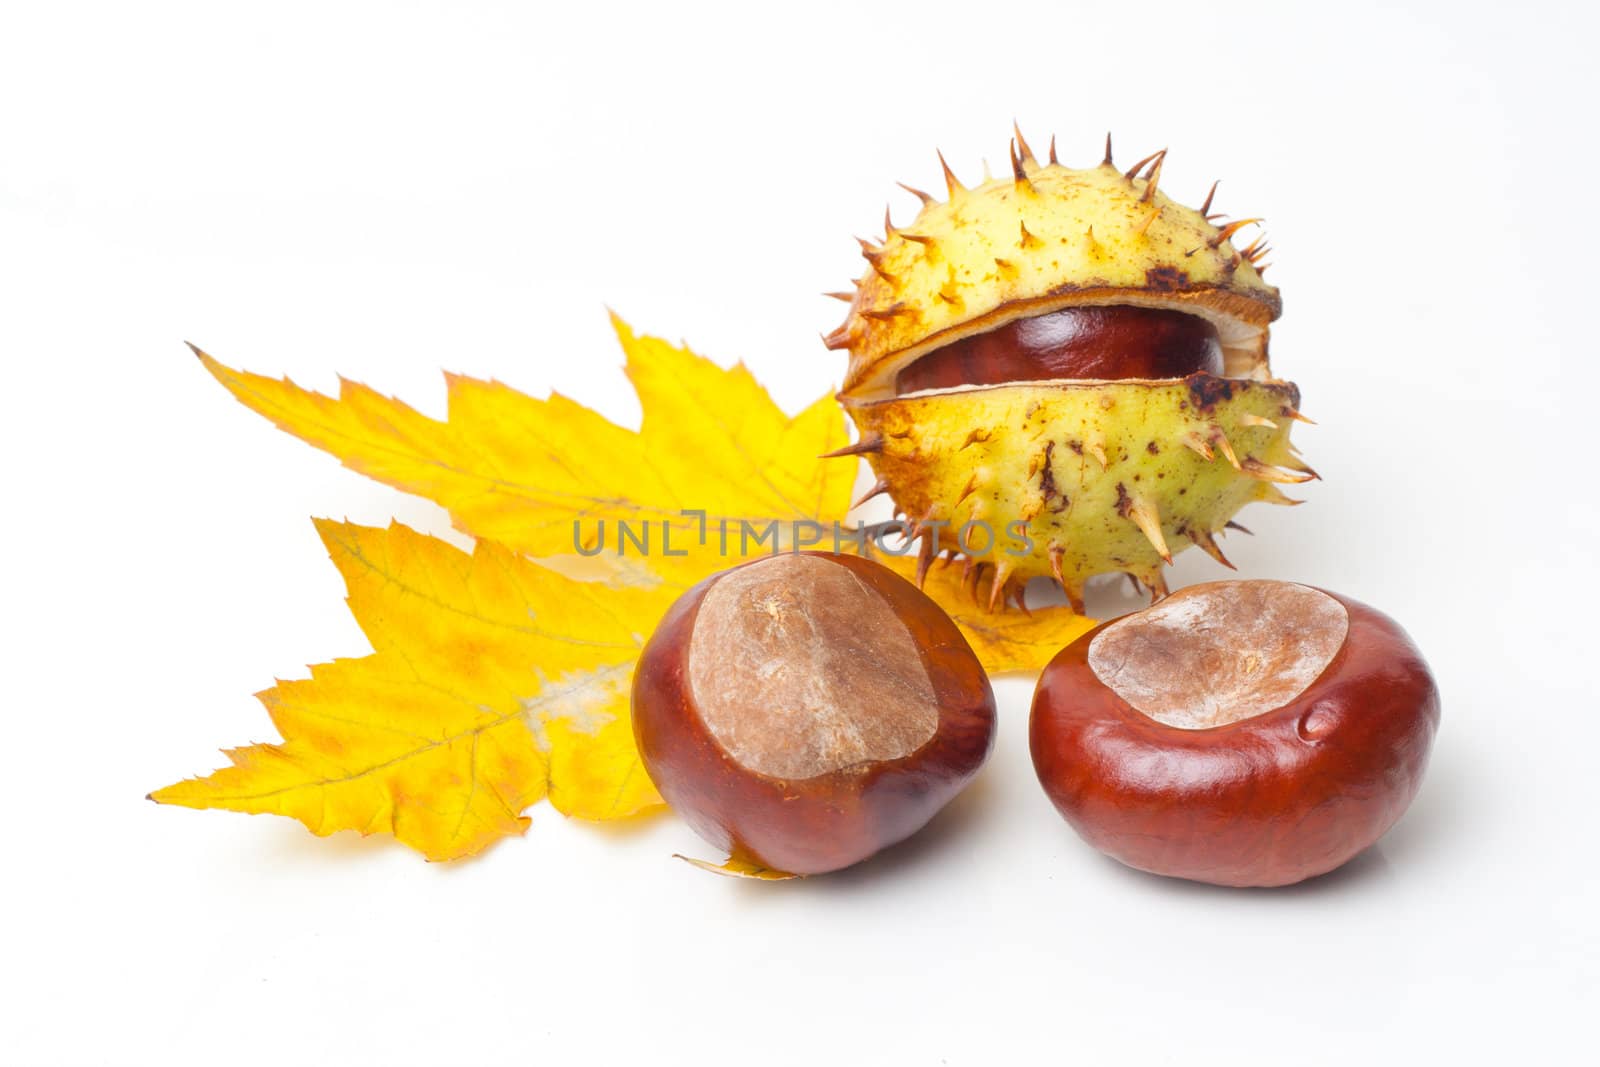 Chestnut with colorful leafs on white background